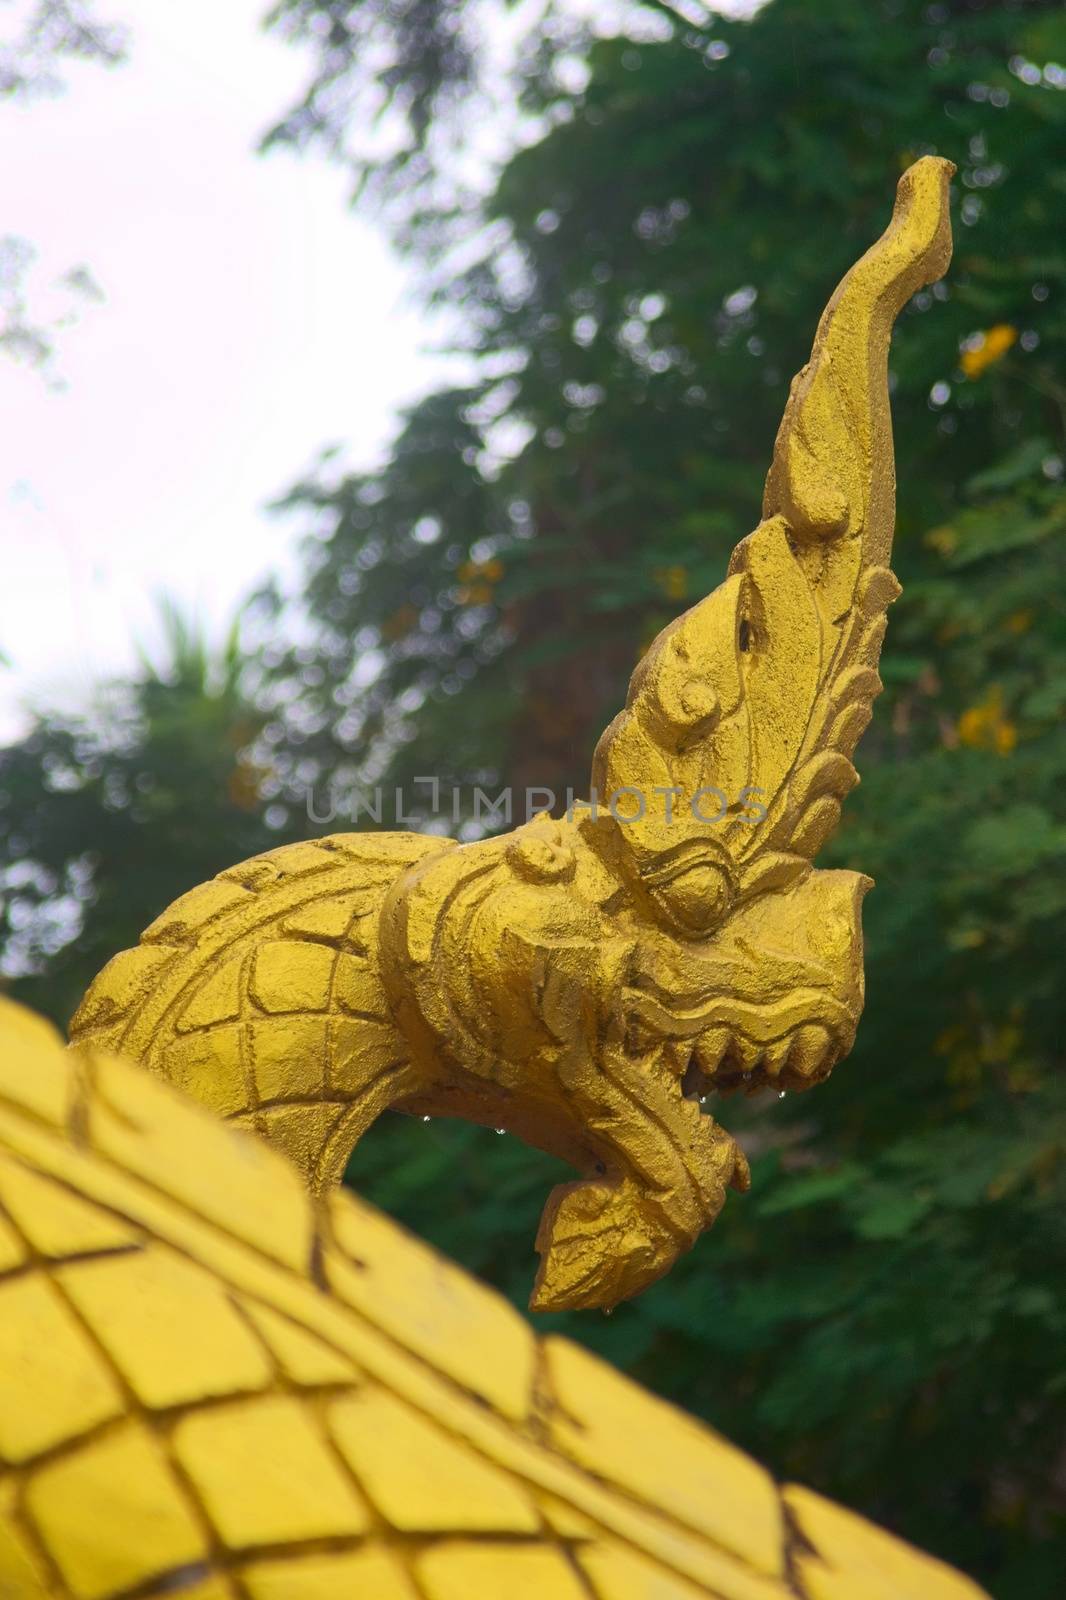 Gilded sculpture of a Naga serpent, a mythological protector creature, at the entrance of a Buddhist temple in Luang Prabang, Laos. by hernan_hyper